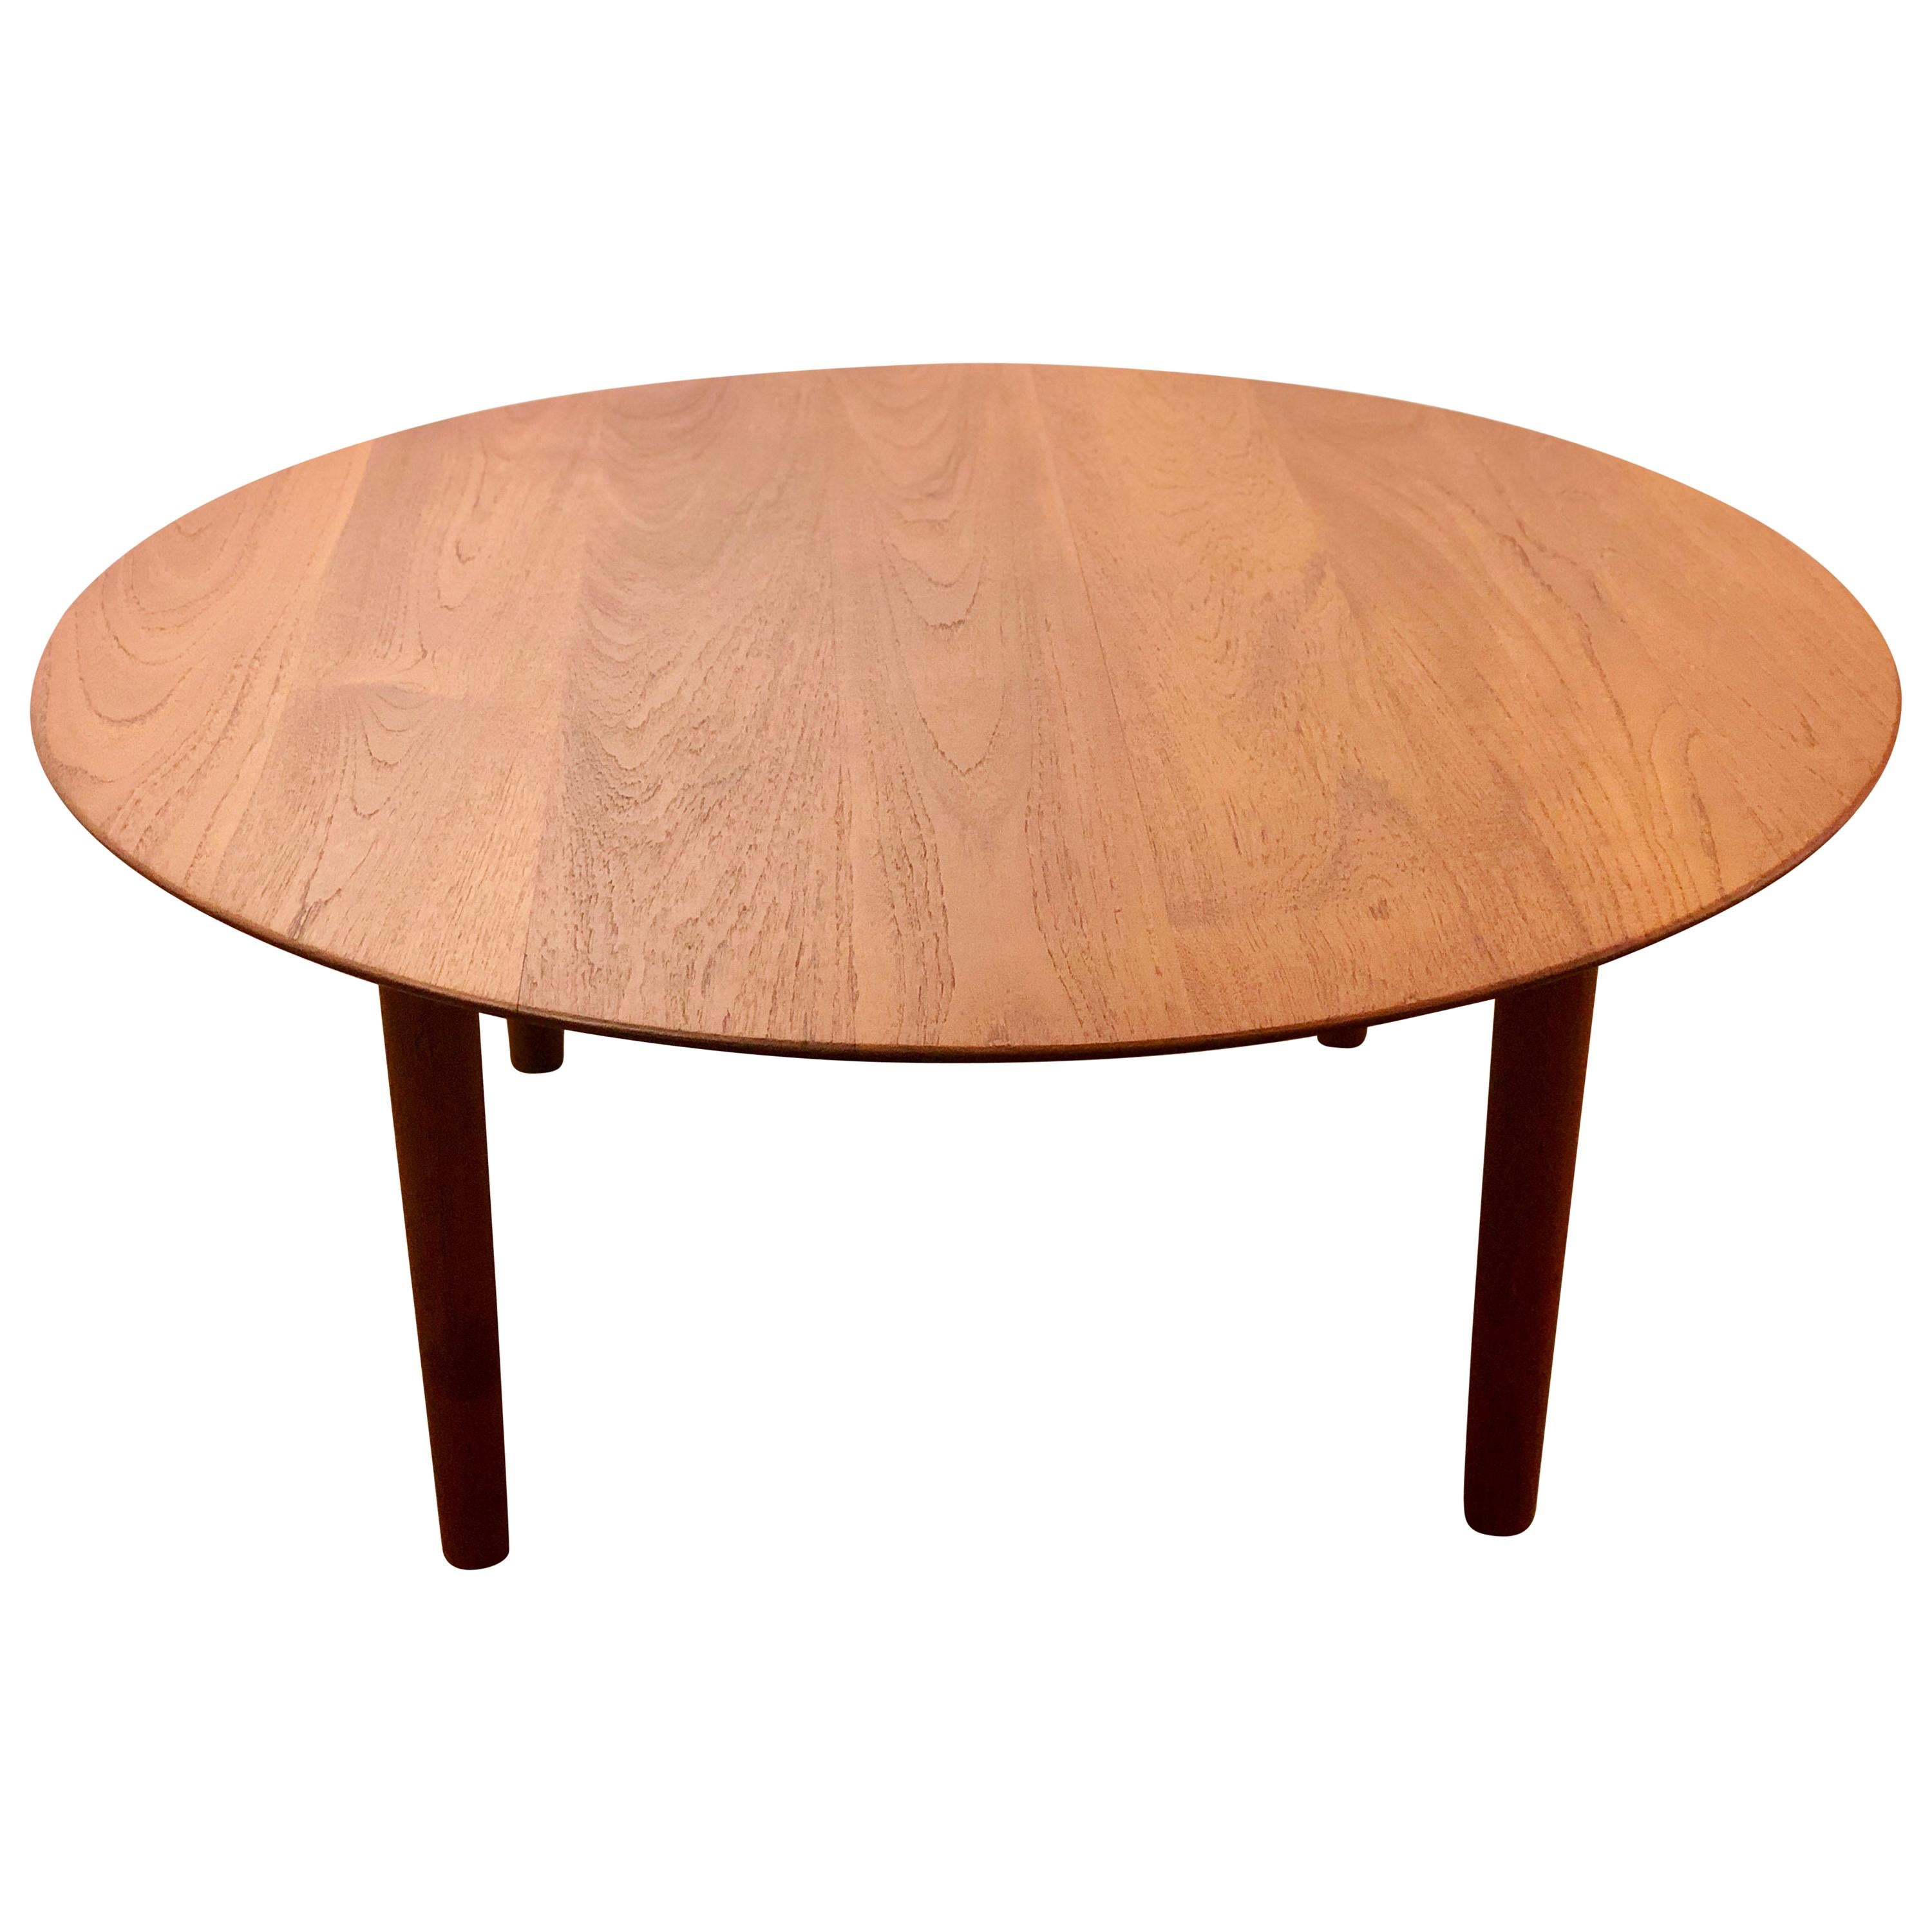 Danish Modern Solid Teak Round Coffee Table with Beveled Edge